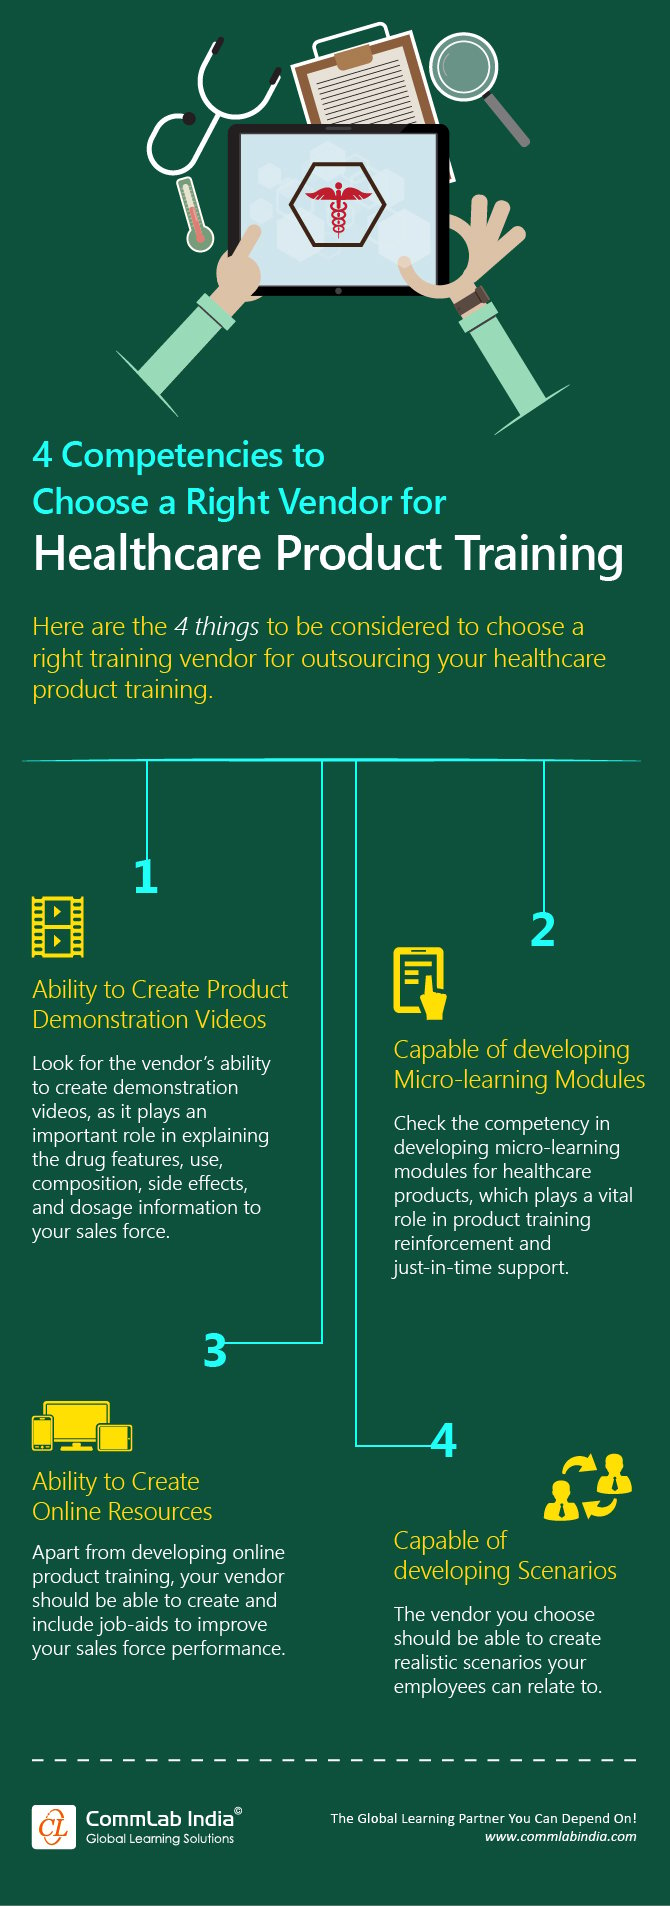 4 Competencies to Choose a Right Vendor for Healthcare Product Training [Infographic]